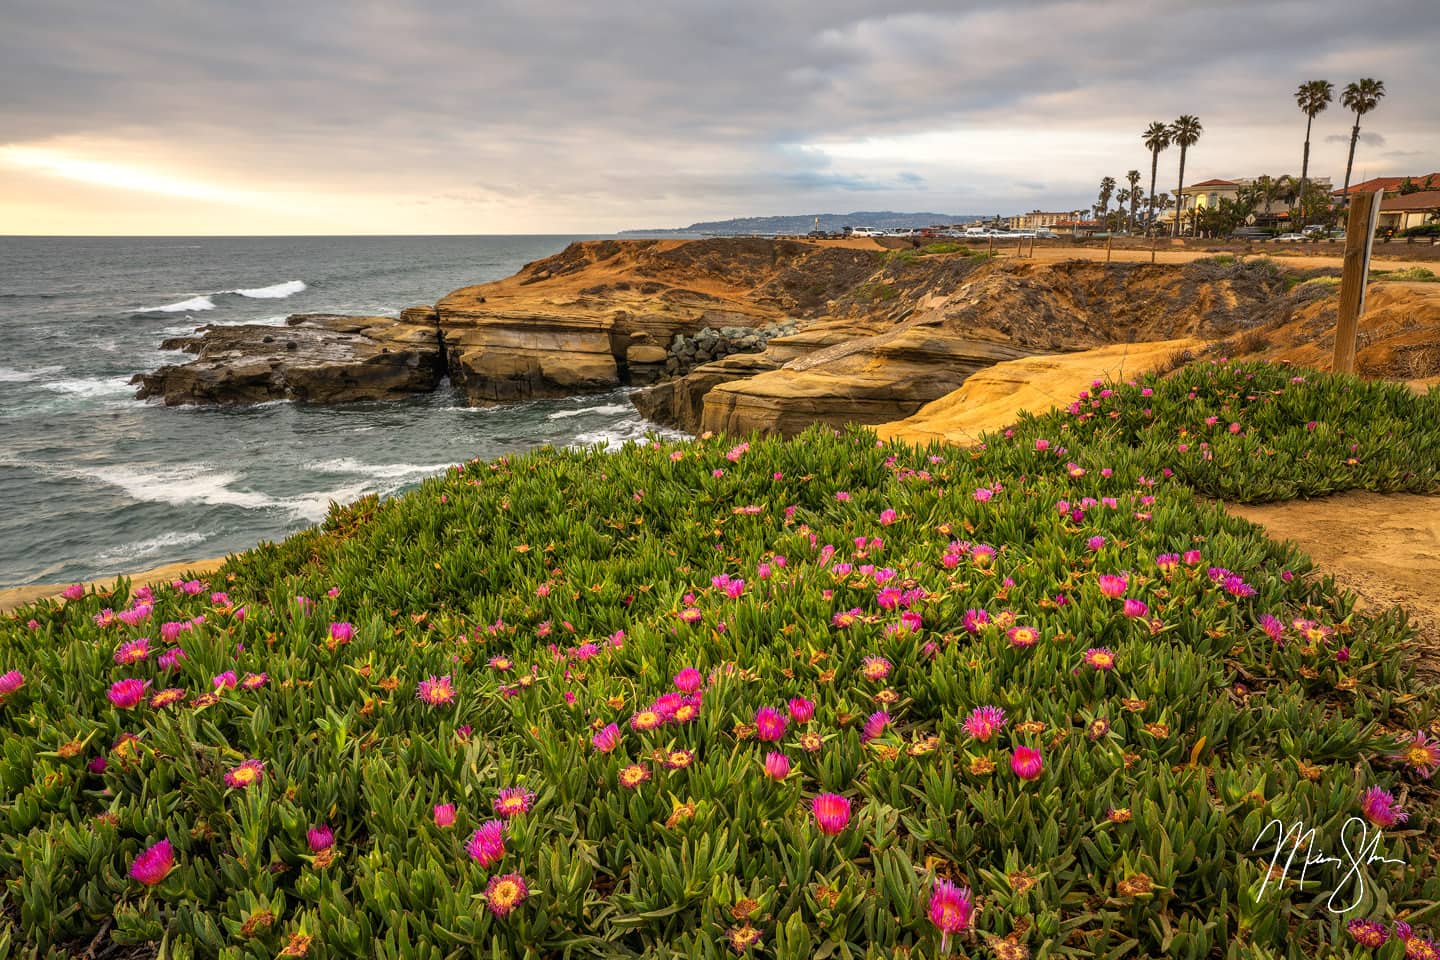 Beautiful flowers at springtime at San Diego’s Sunset Cliffs. Sunset was about half an hour away, so the light was nice and soft while the waves crashed over the cliffs below.